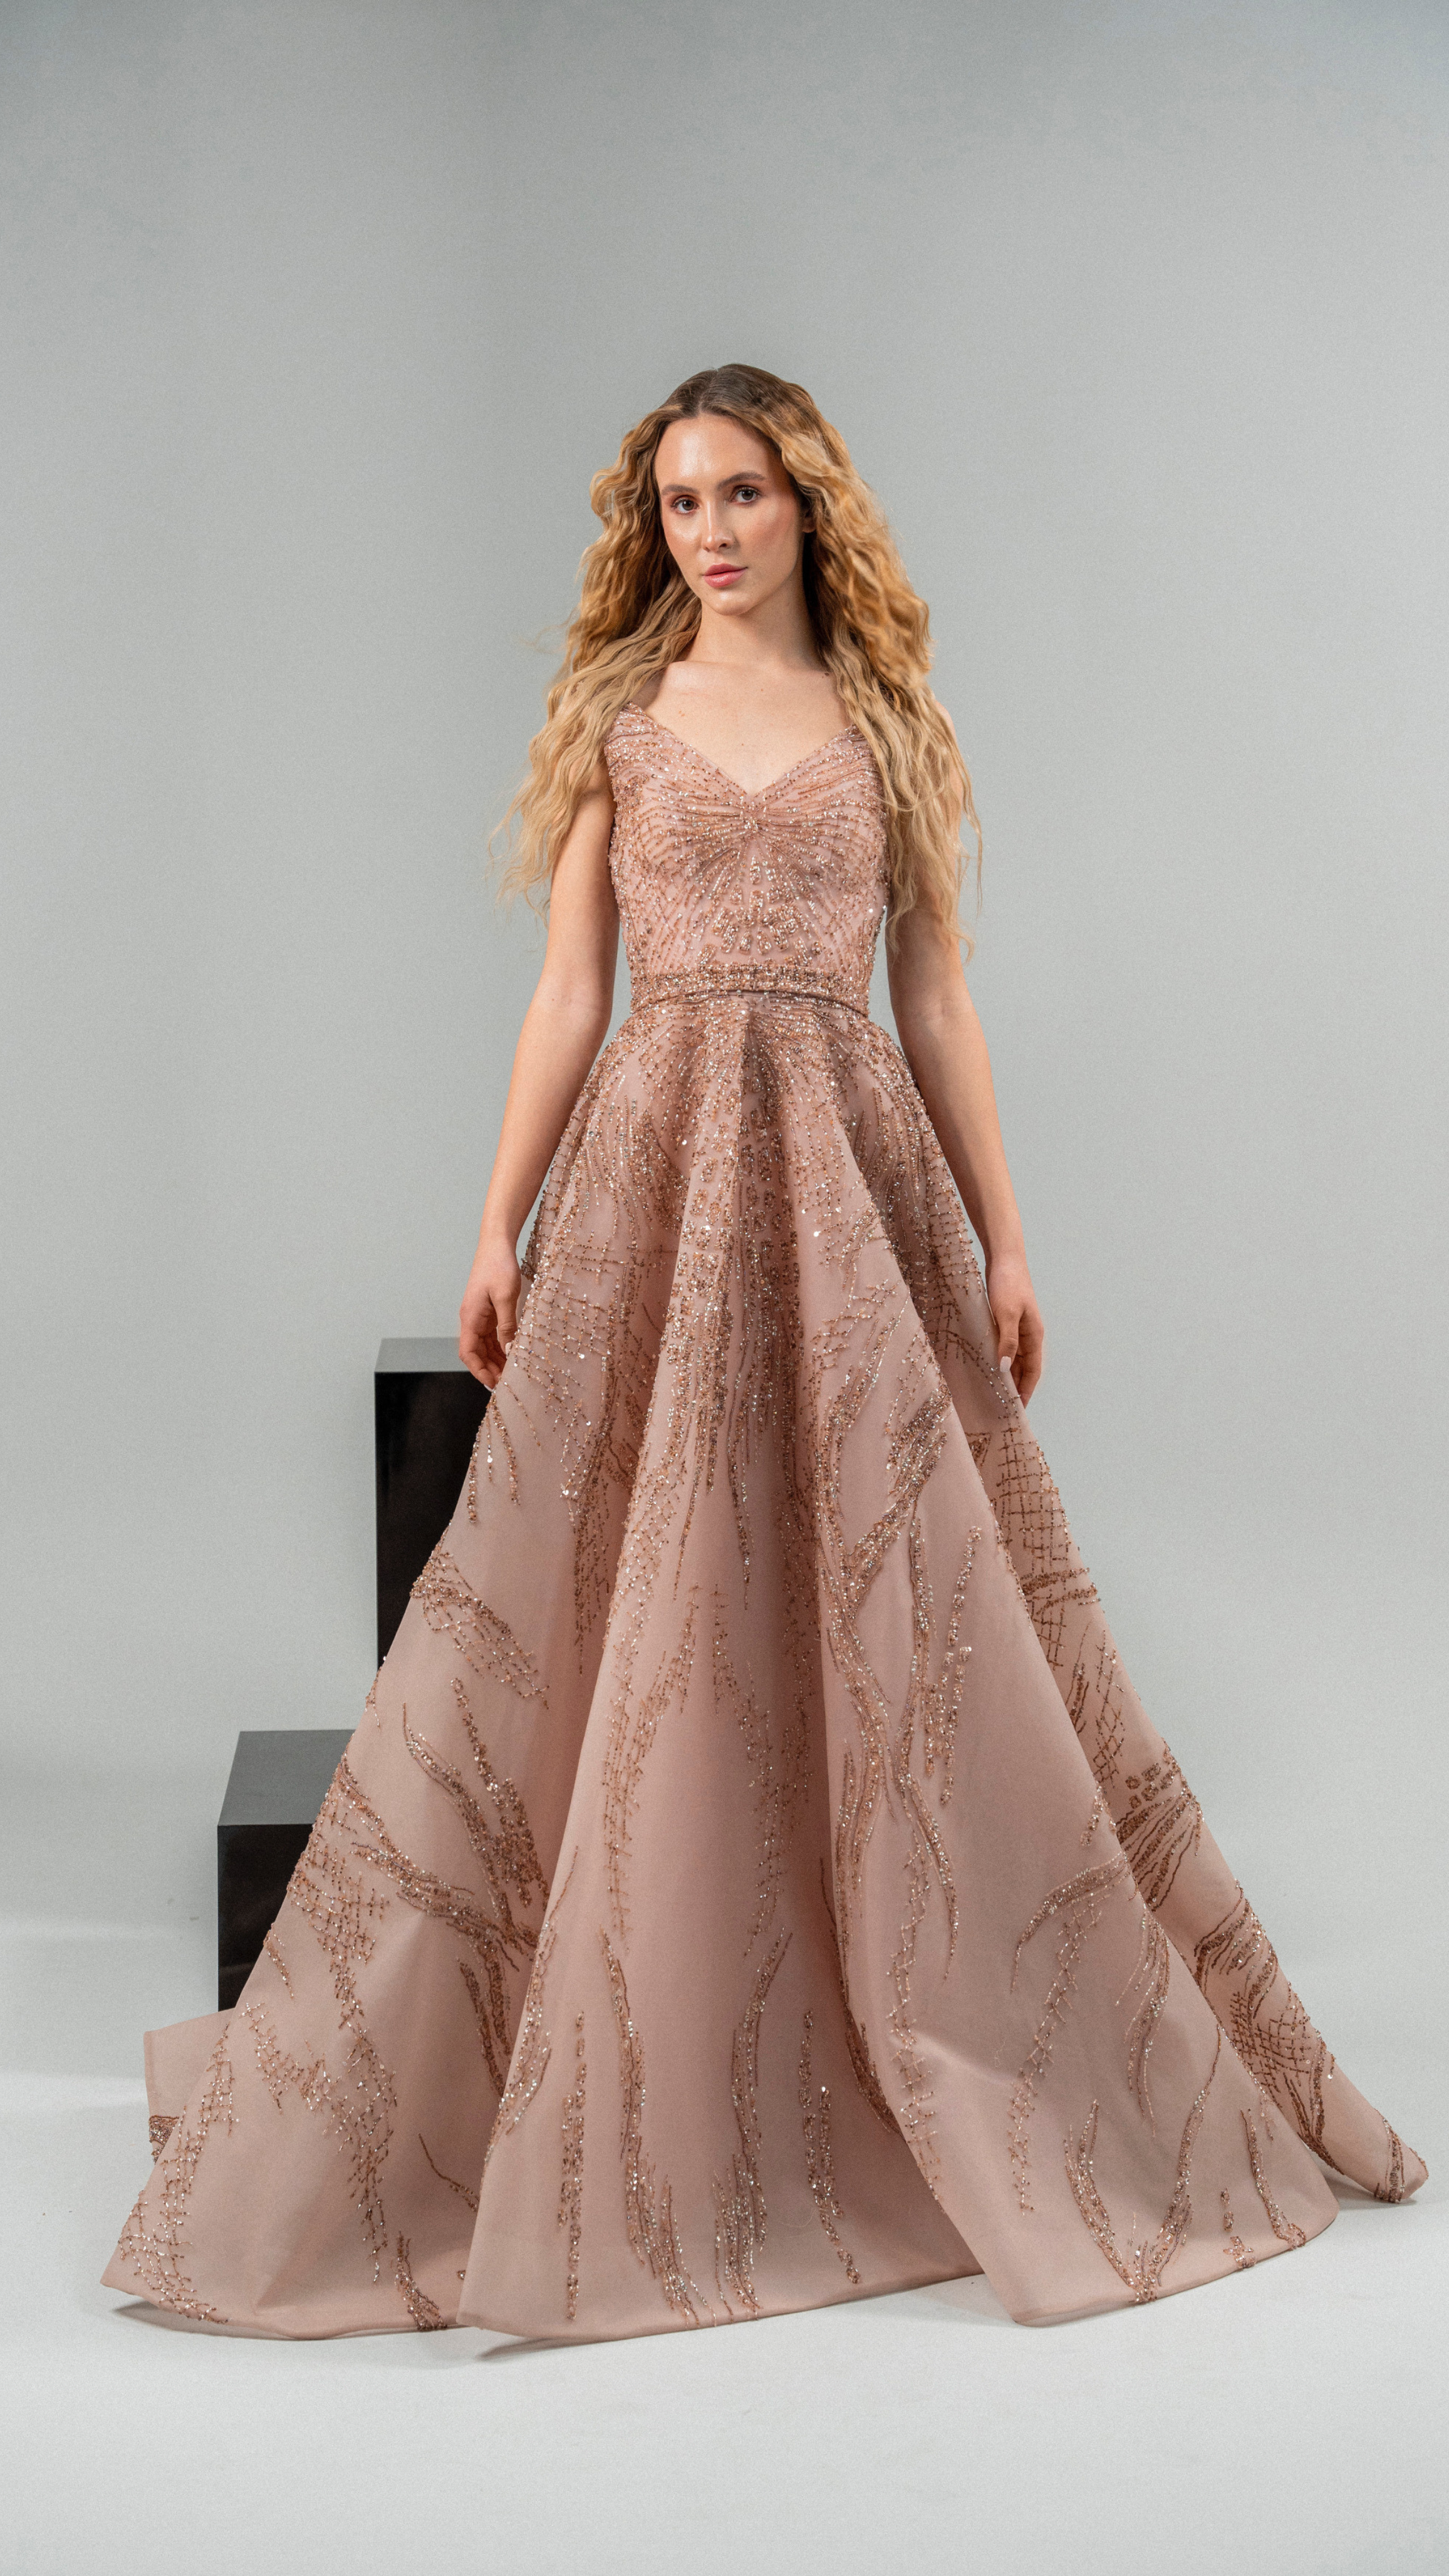 Long Exquisite Gown with a Voluminous Skirt